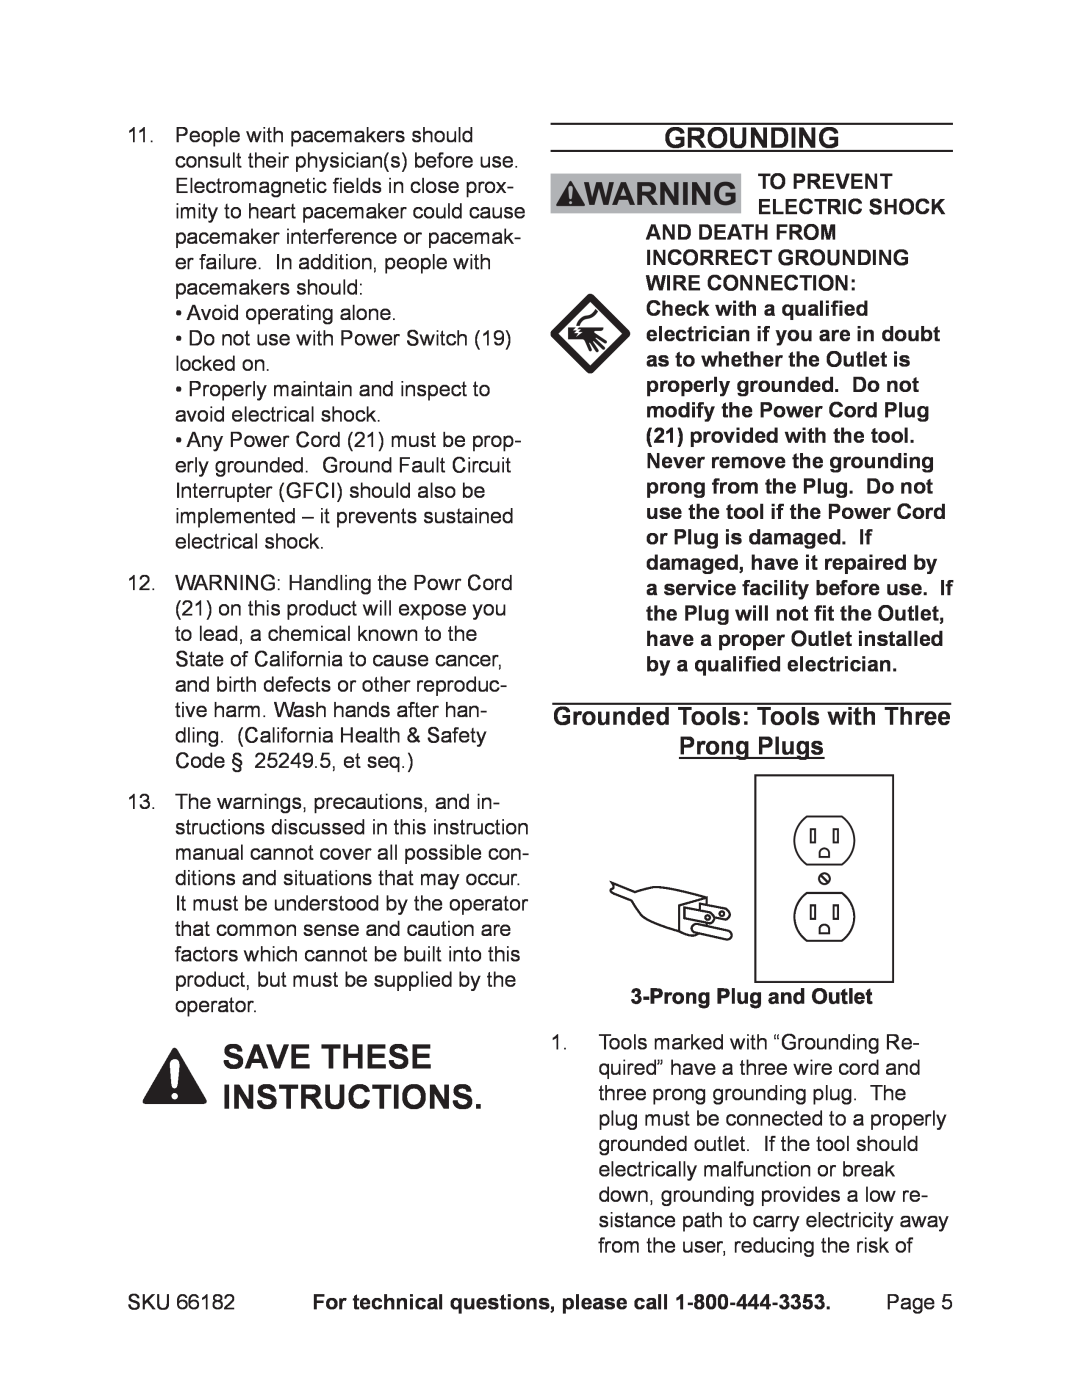 Chicago Electric 66182 Save these instructions, Grounding, Grounded Tools Tools with Three Prong Plugs 